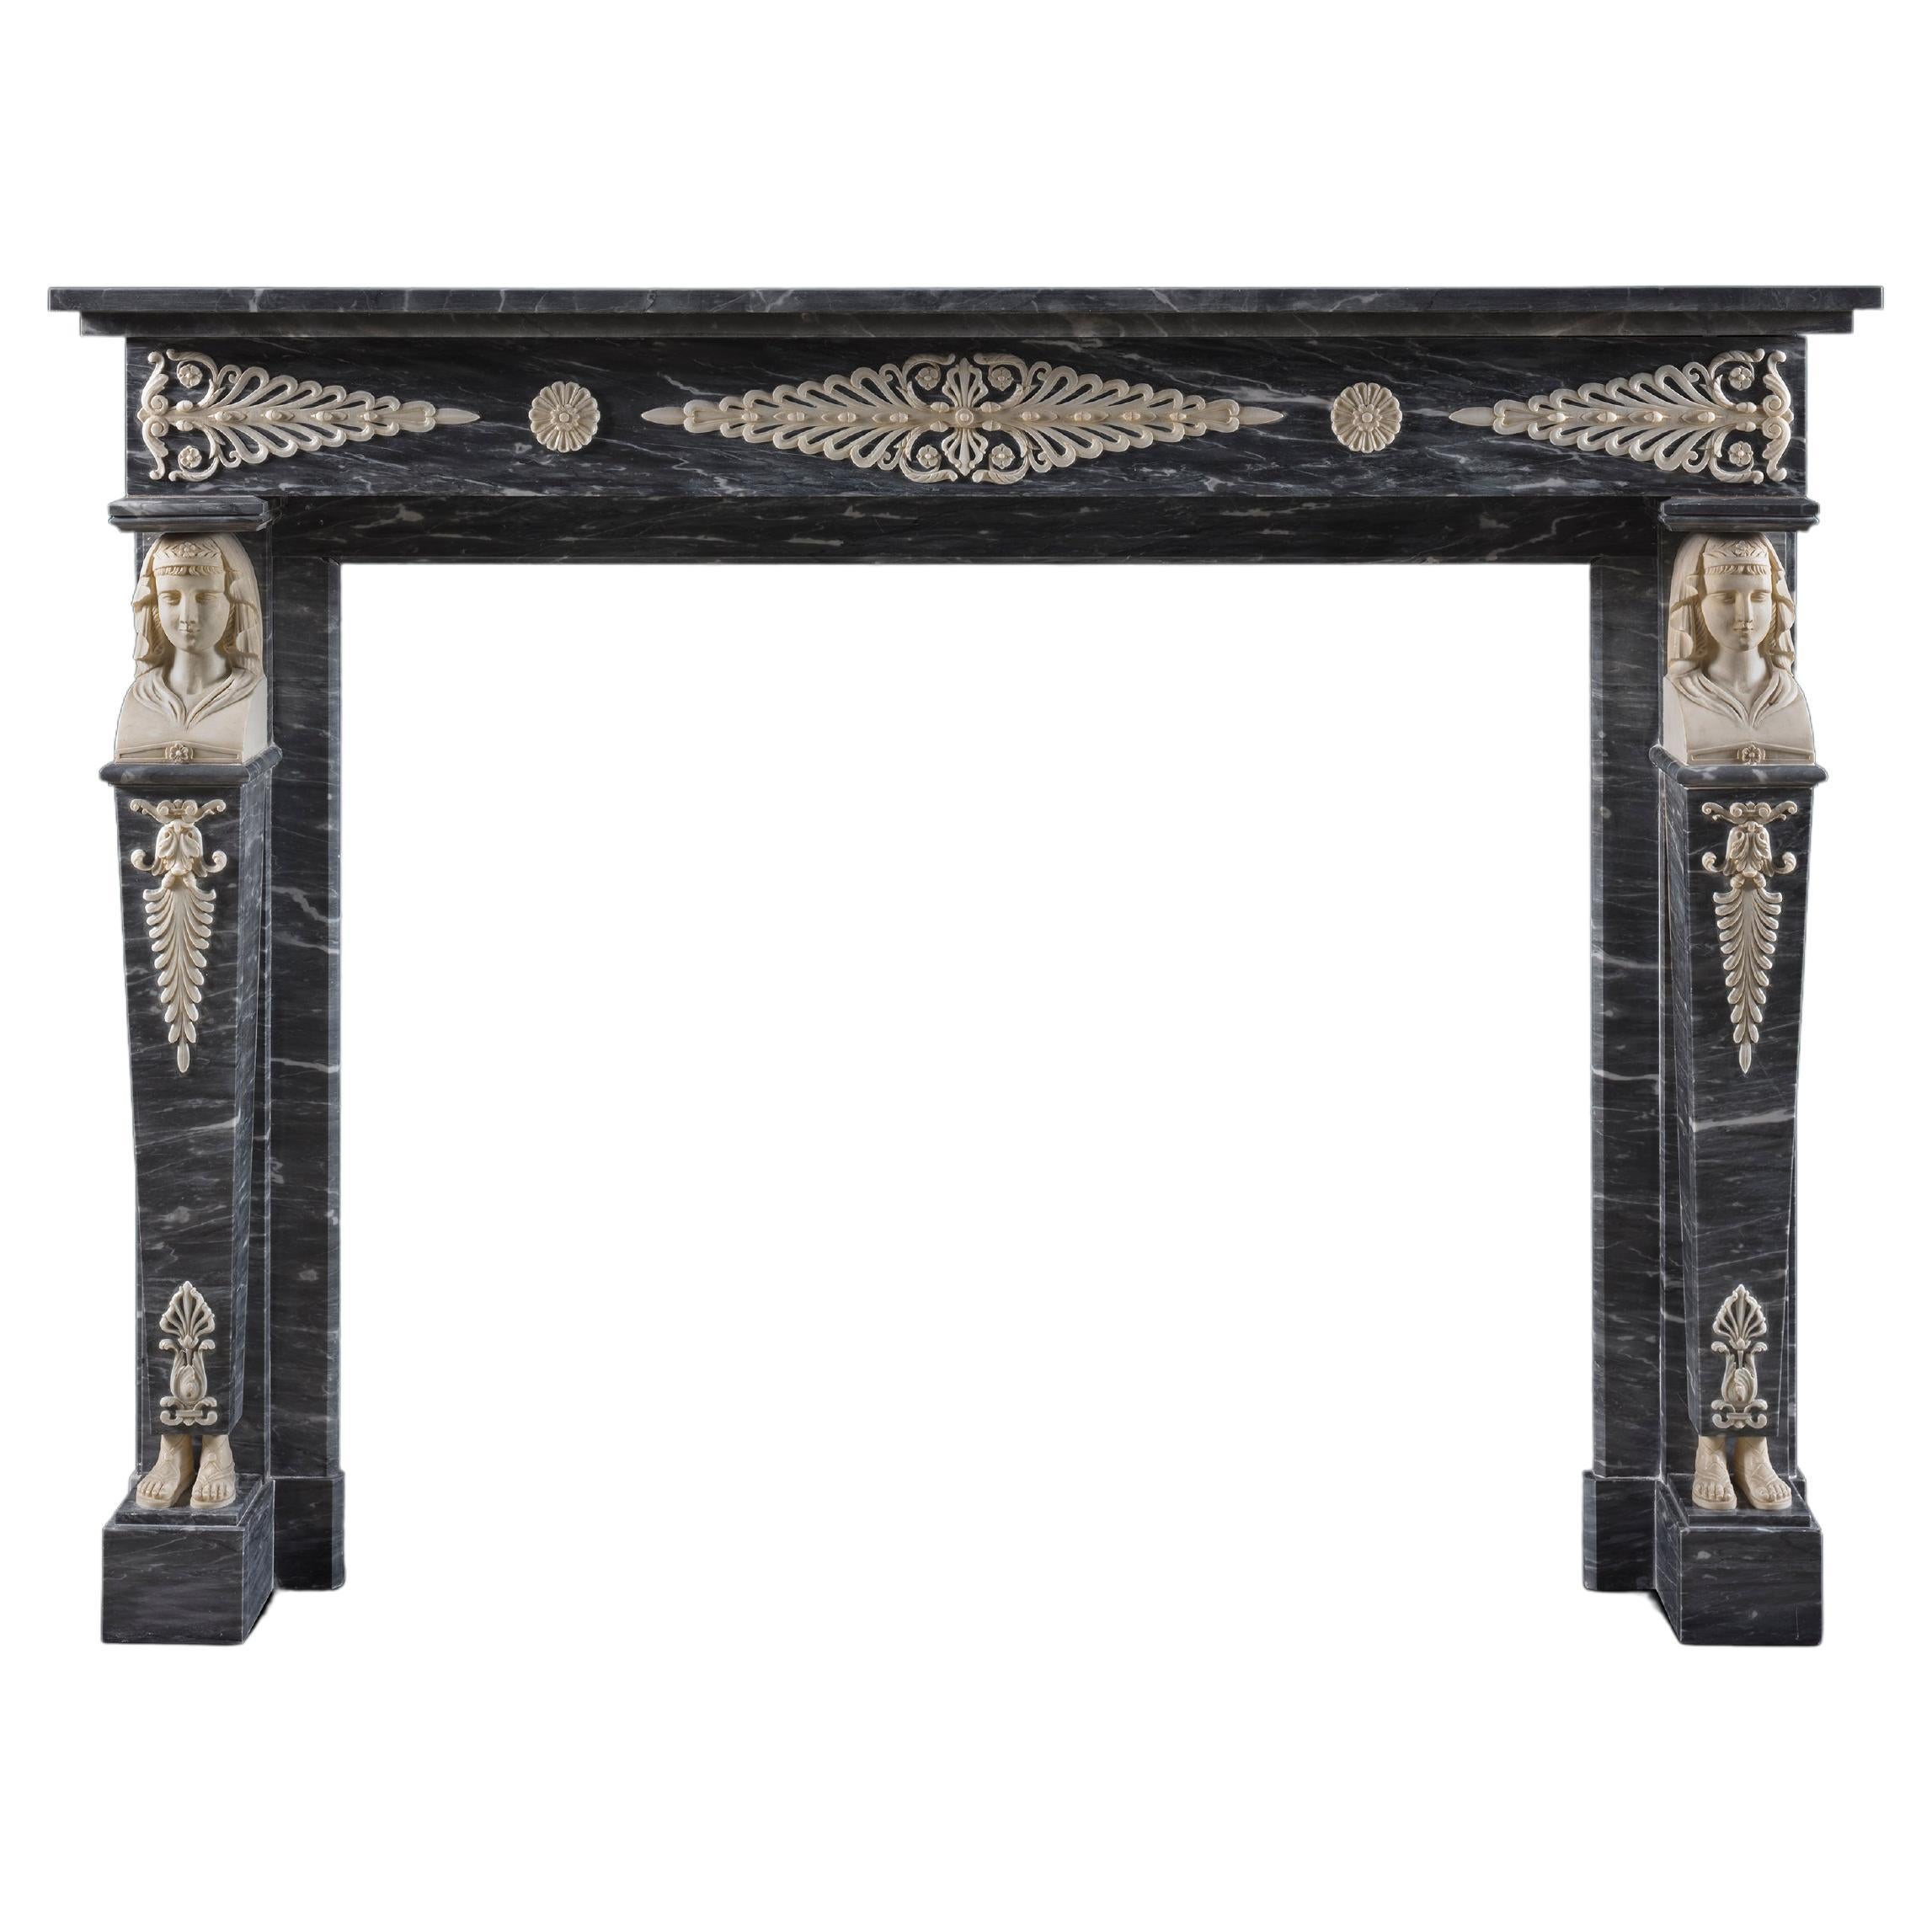 Egyptian Revival Fireplaces and Mantels